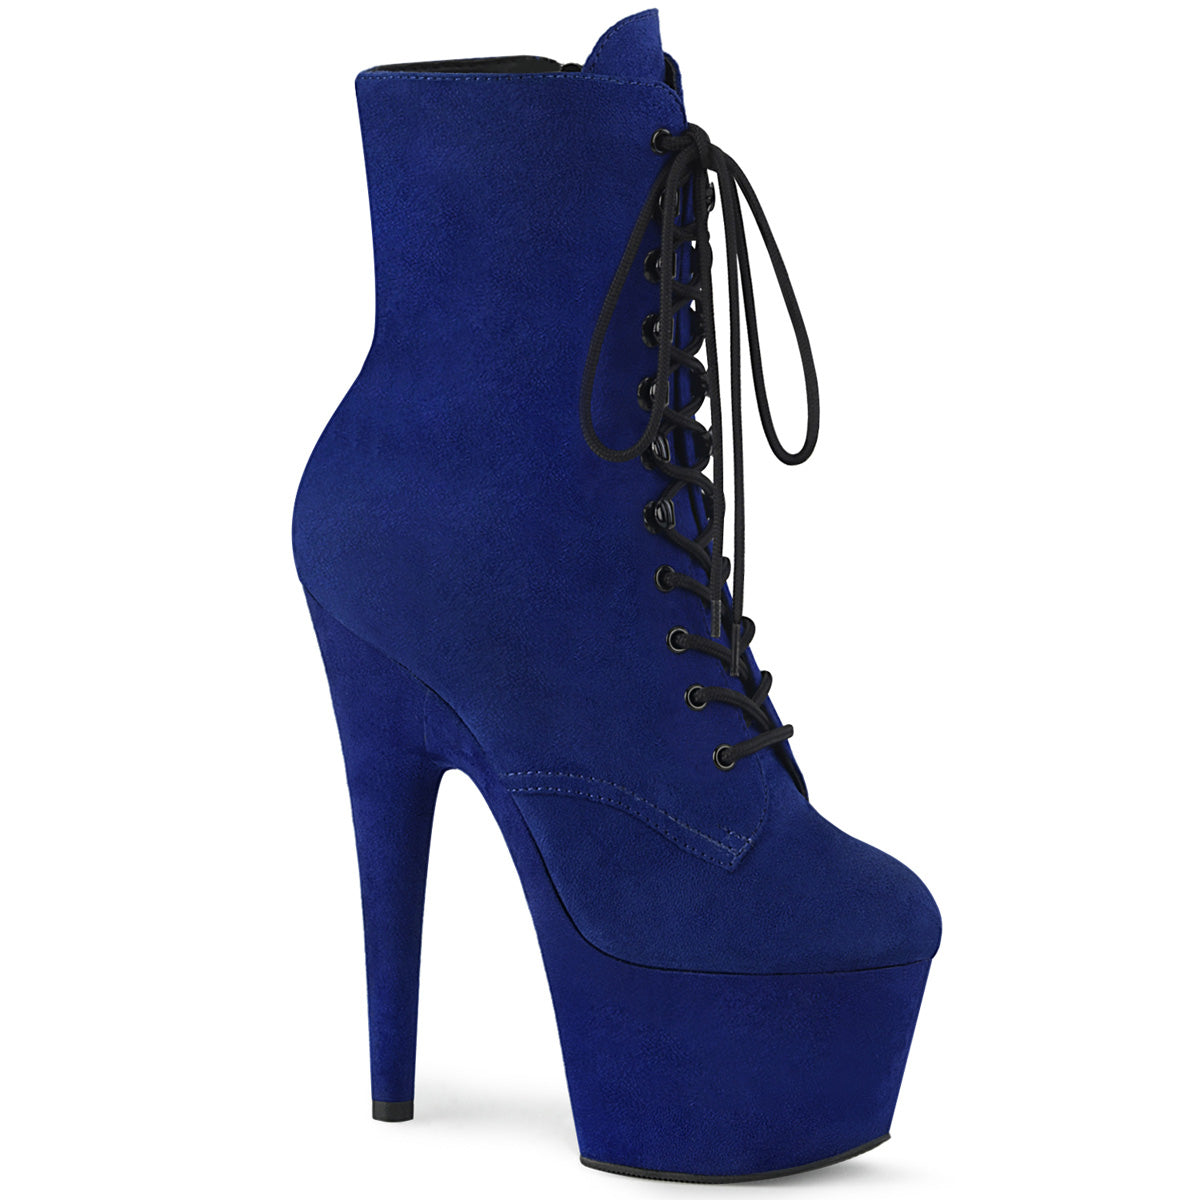 ADORE-1020FS 7" Heel Royal Blue Exotic Dancing Ankle Boots